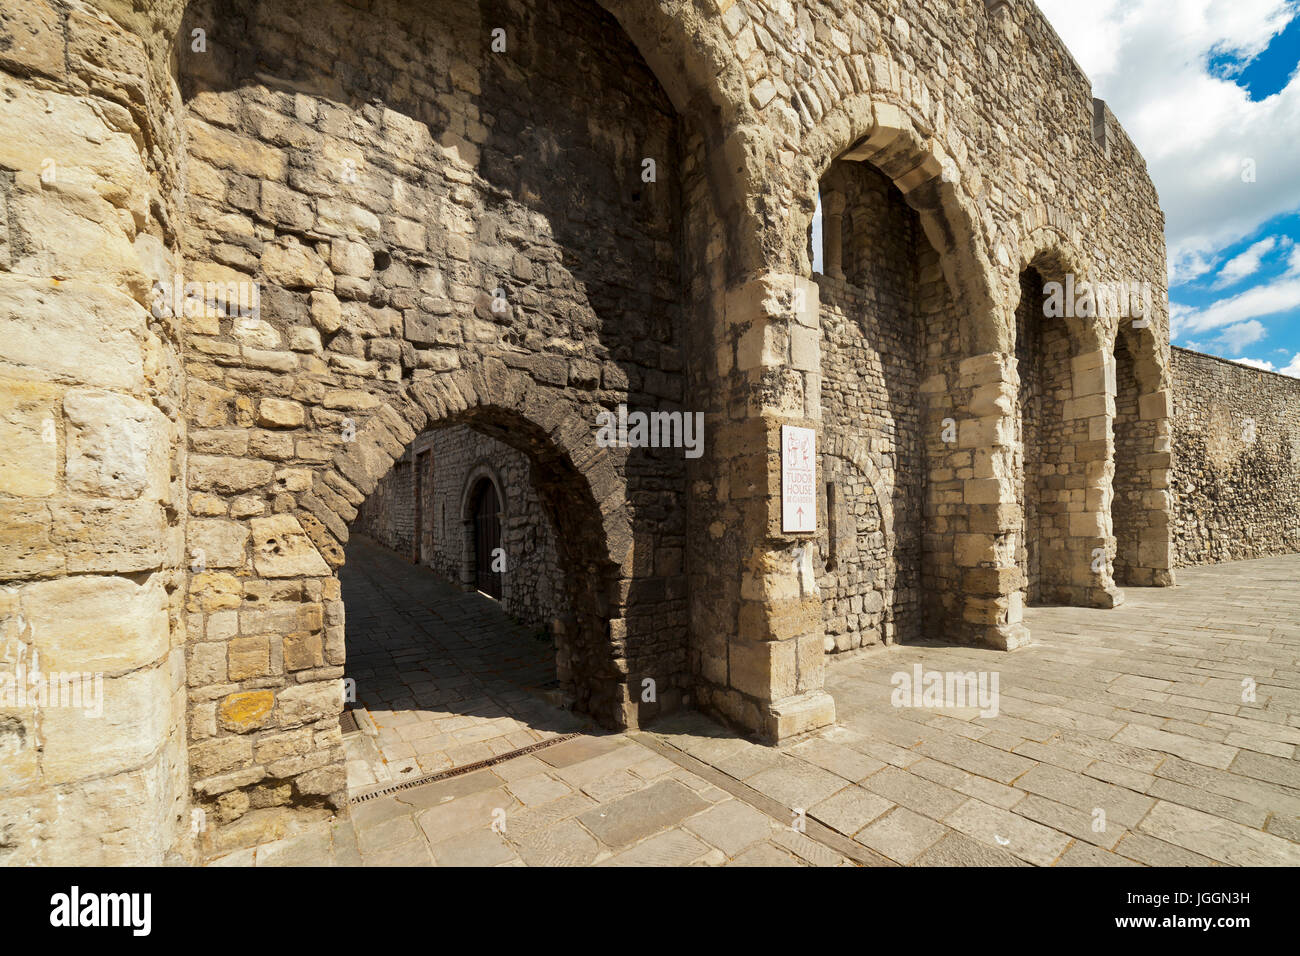 The Old City wall Arcades and gateway leading to Blue Anchor Lane, Western Esplanade, Southampton. Stock Photo